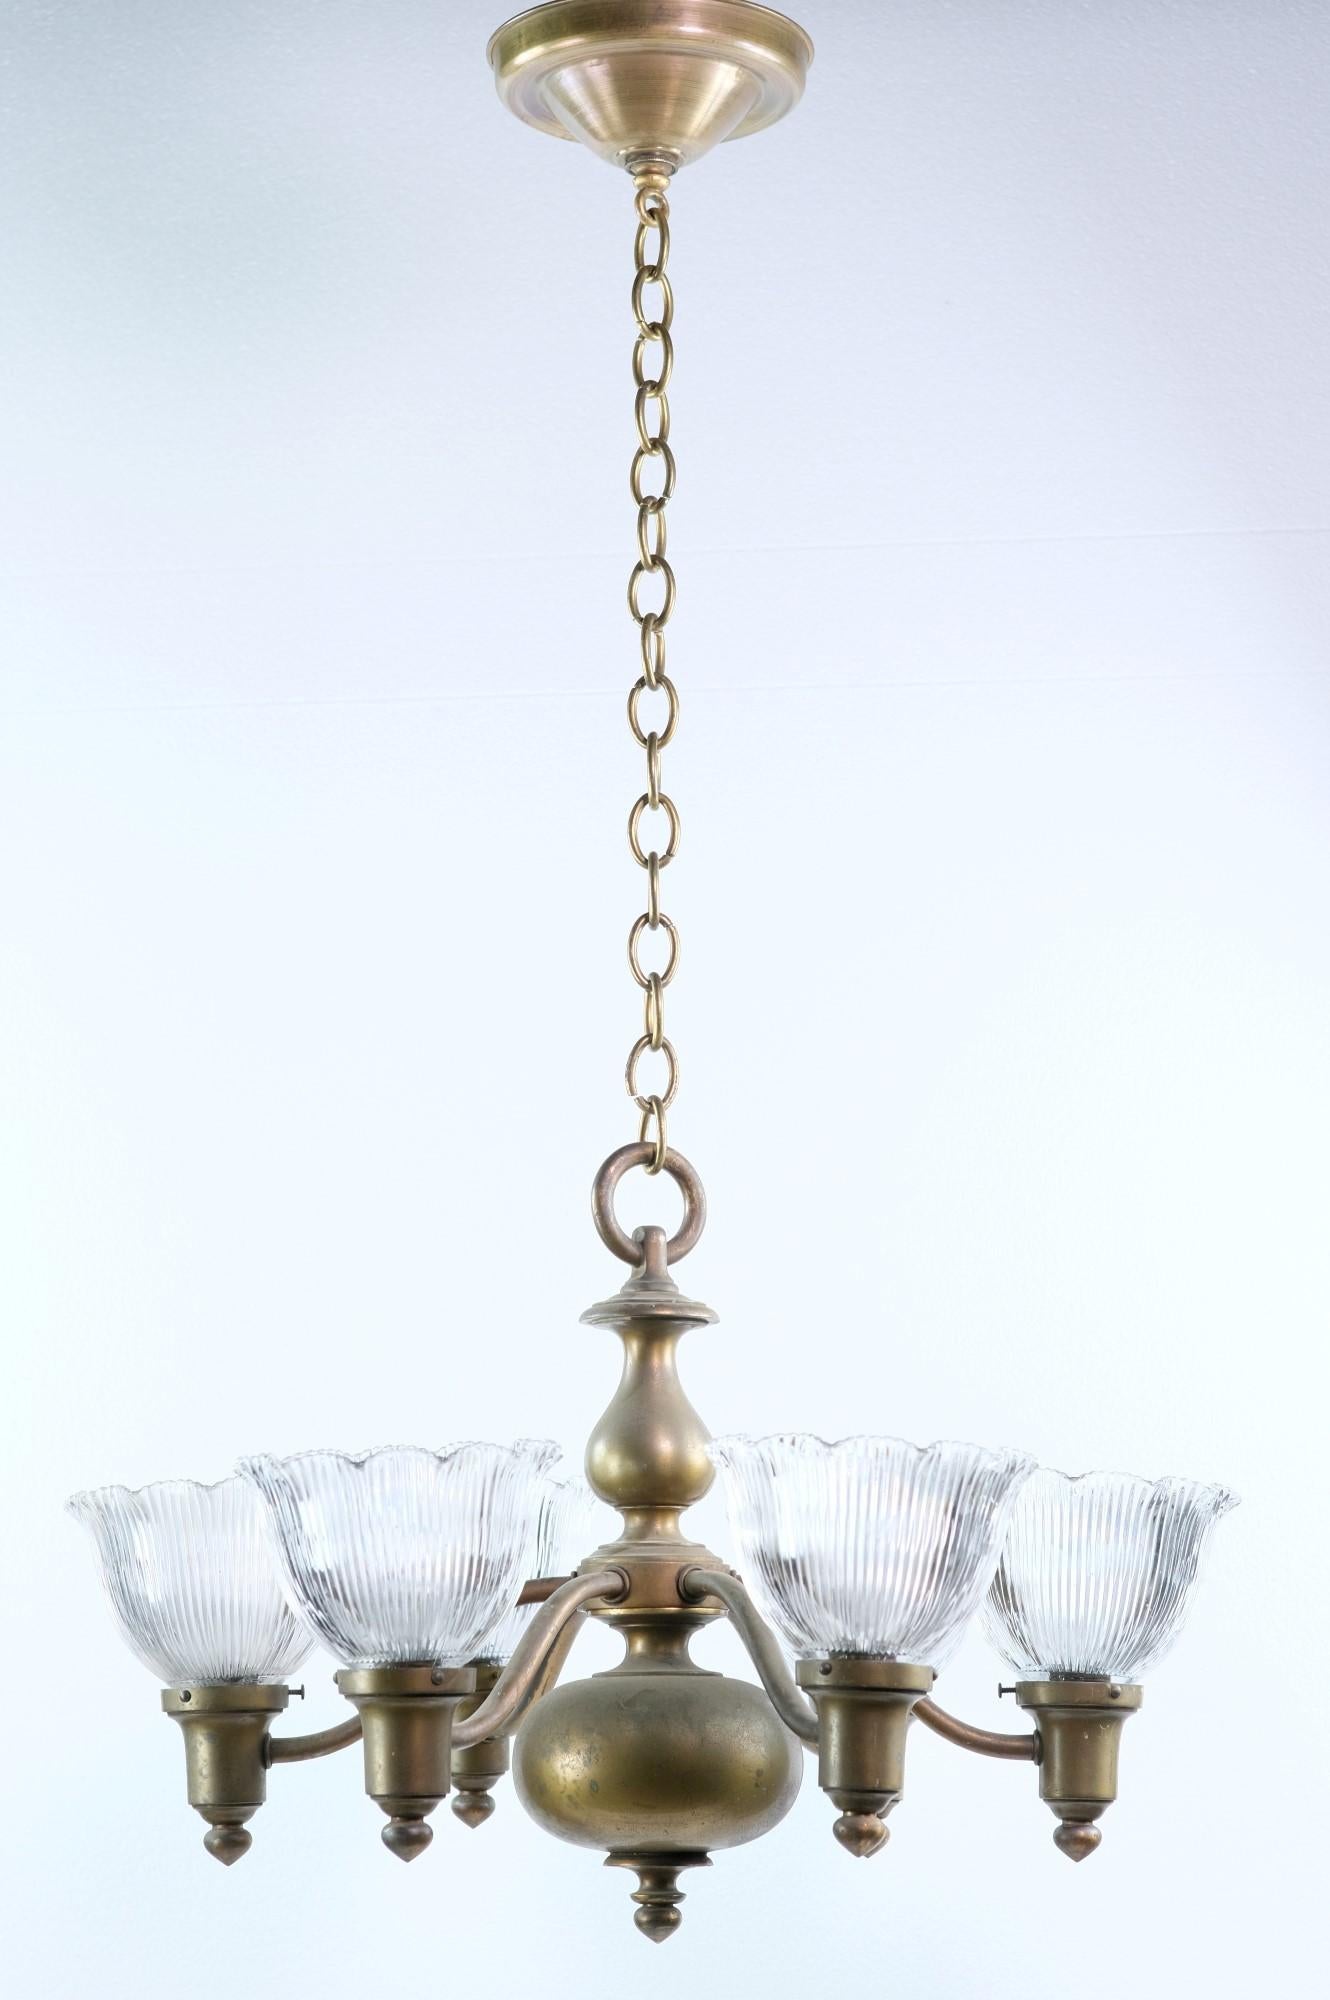 1910s Bronze Chandelier W/ 6 Lights Fitted with Ruffled Holophane Glass Shades 1